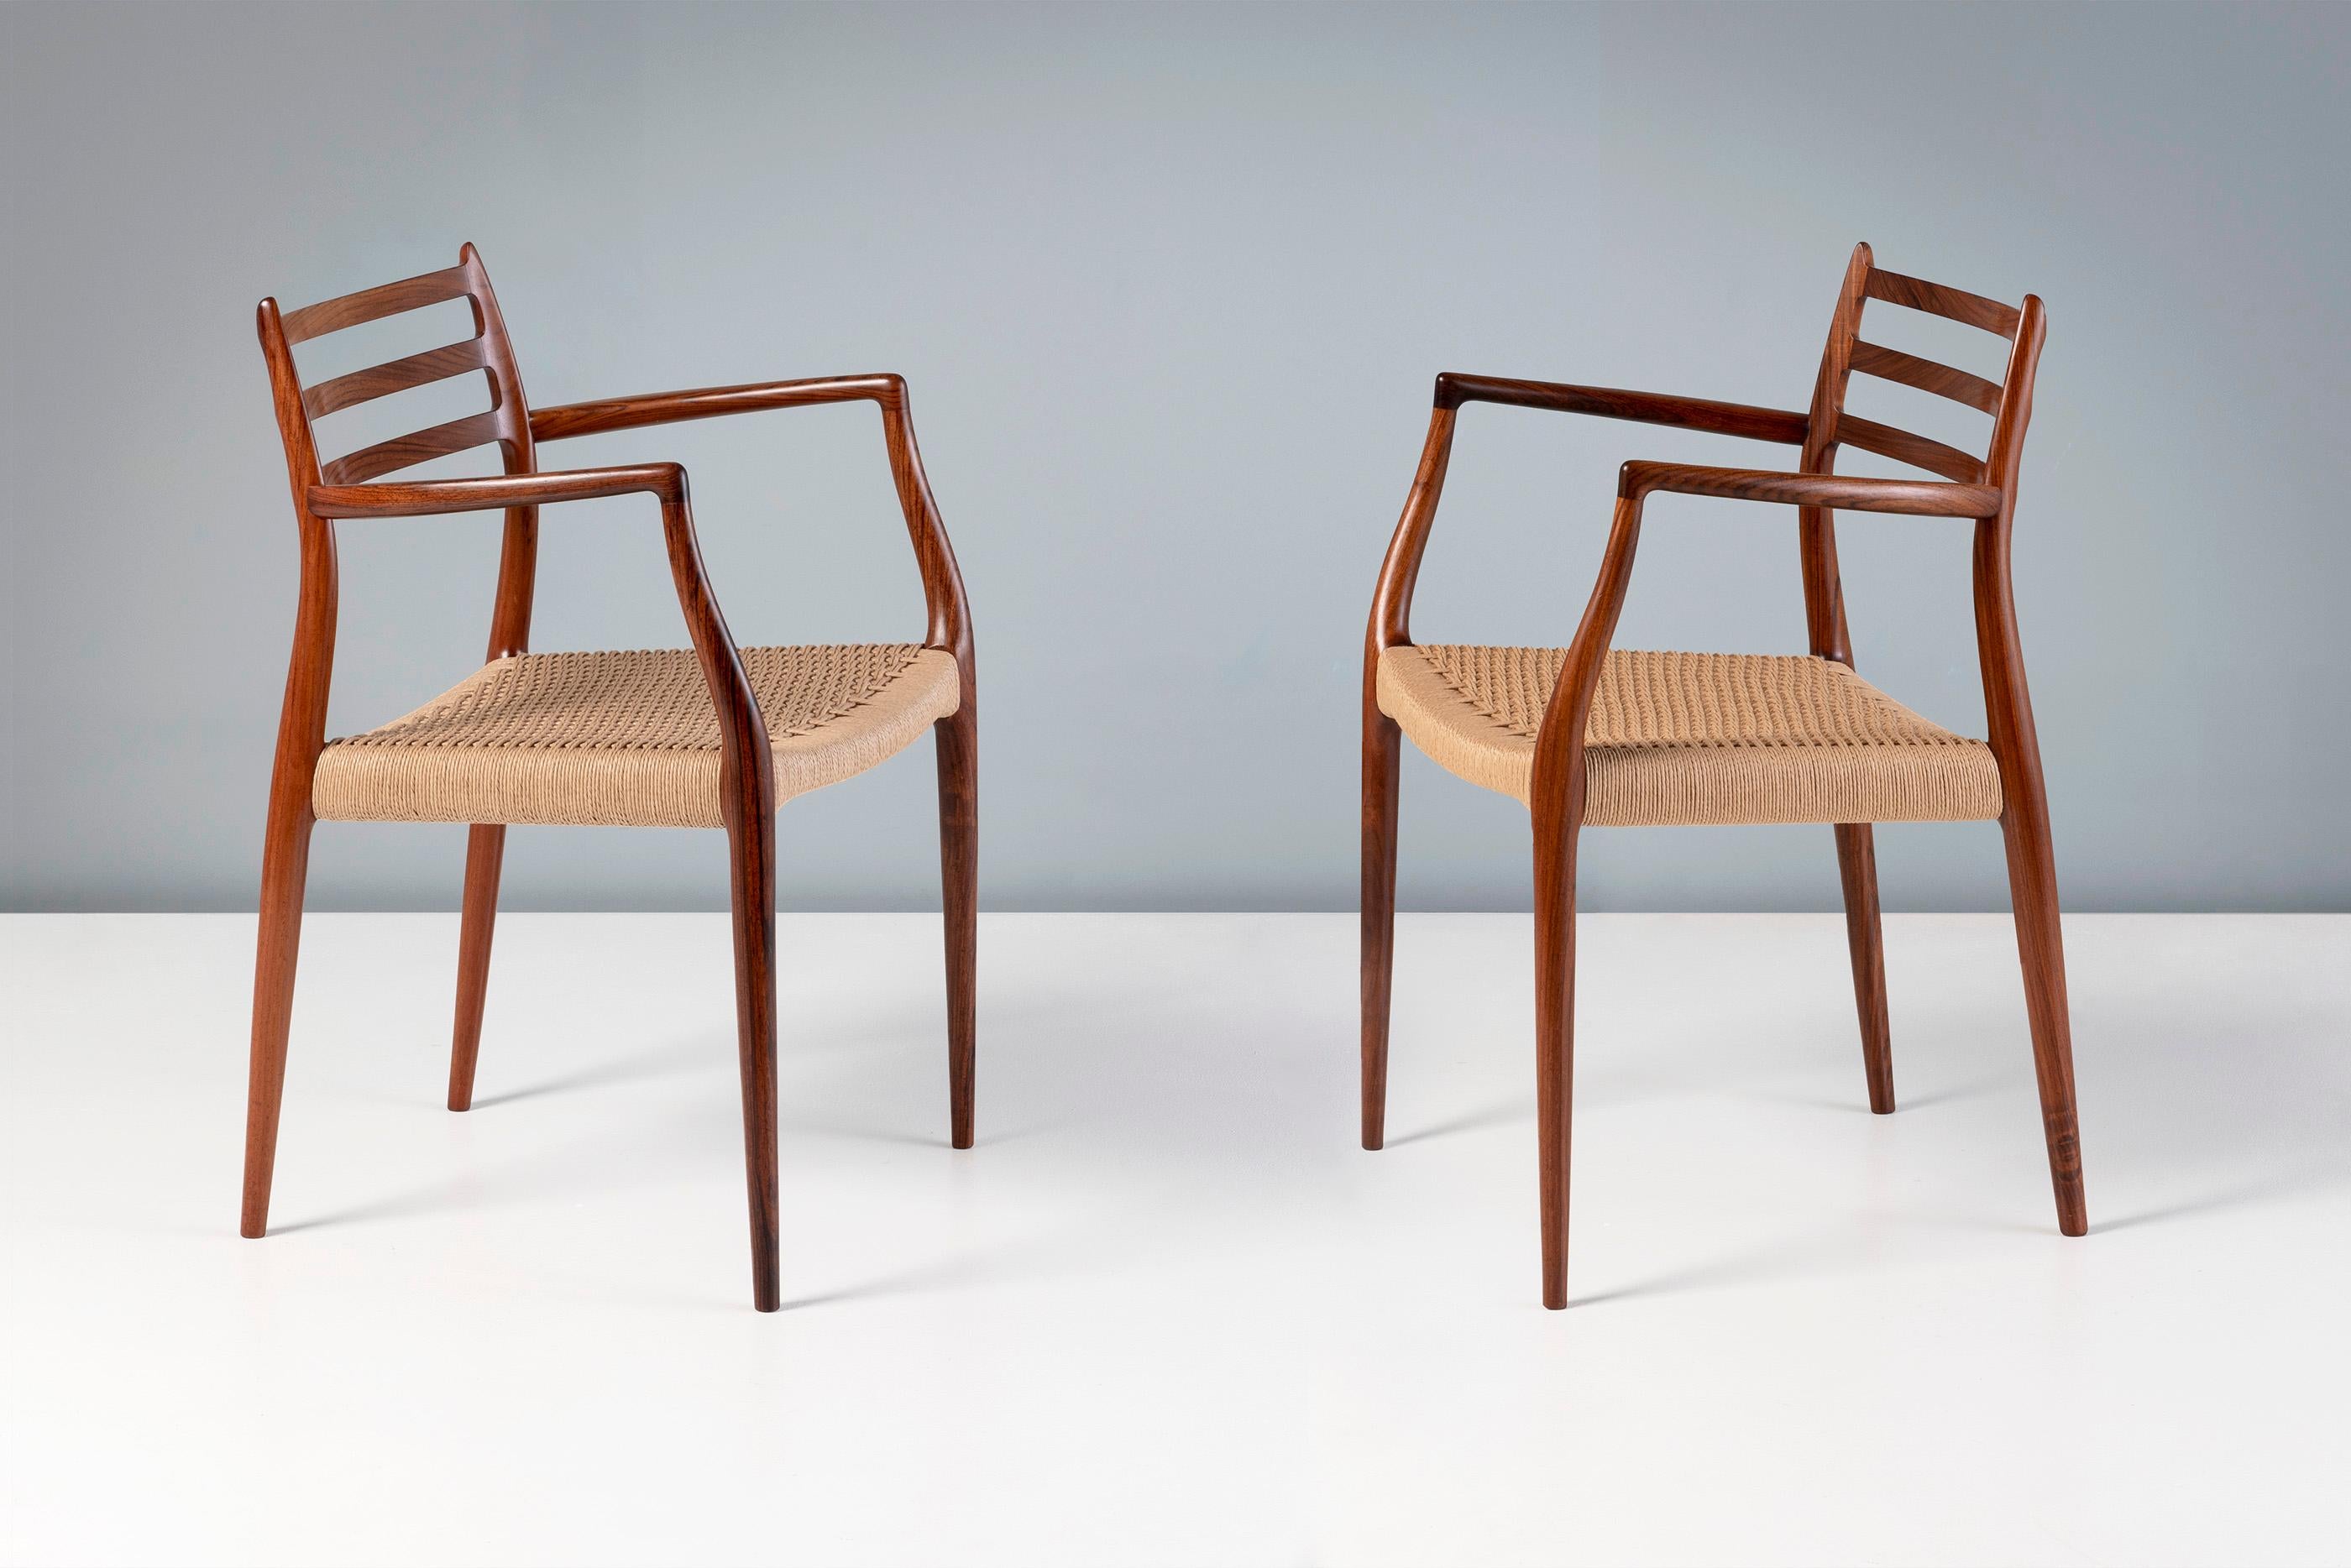 Niels Moller - Pair of Model 62 Armchairs in Rosewood & Papercord, 1962

Rarely seen edition of this iconic design made from exquisite, highly figured rosewood. Designed by Niels Moller for his own company: J.L. Moller Mobelfabrik in Denmark, 1962.